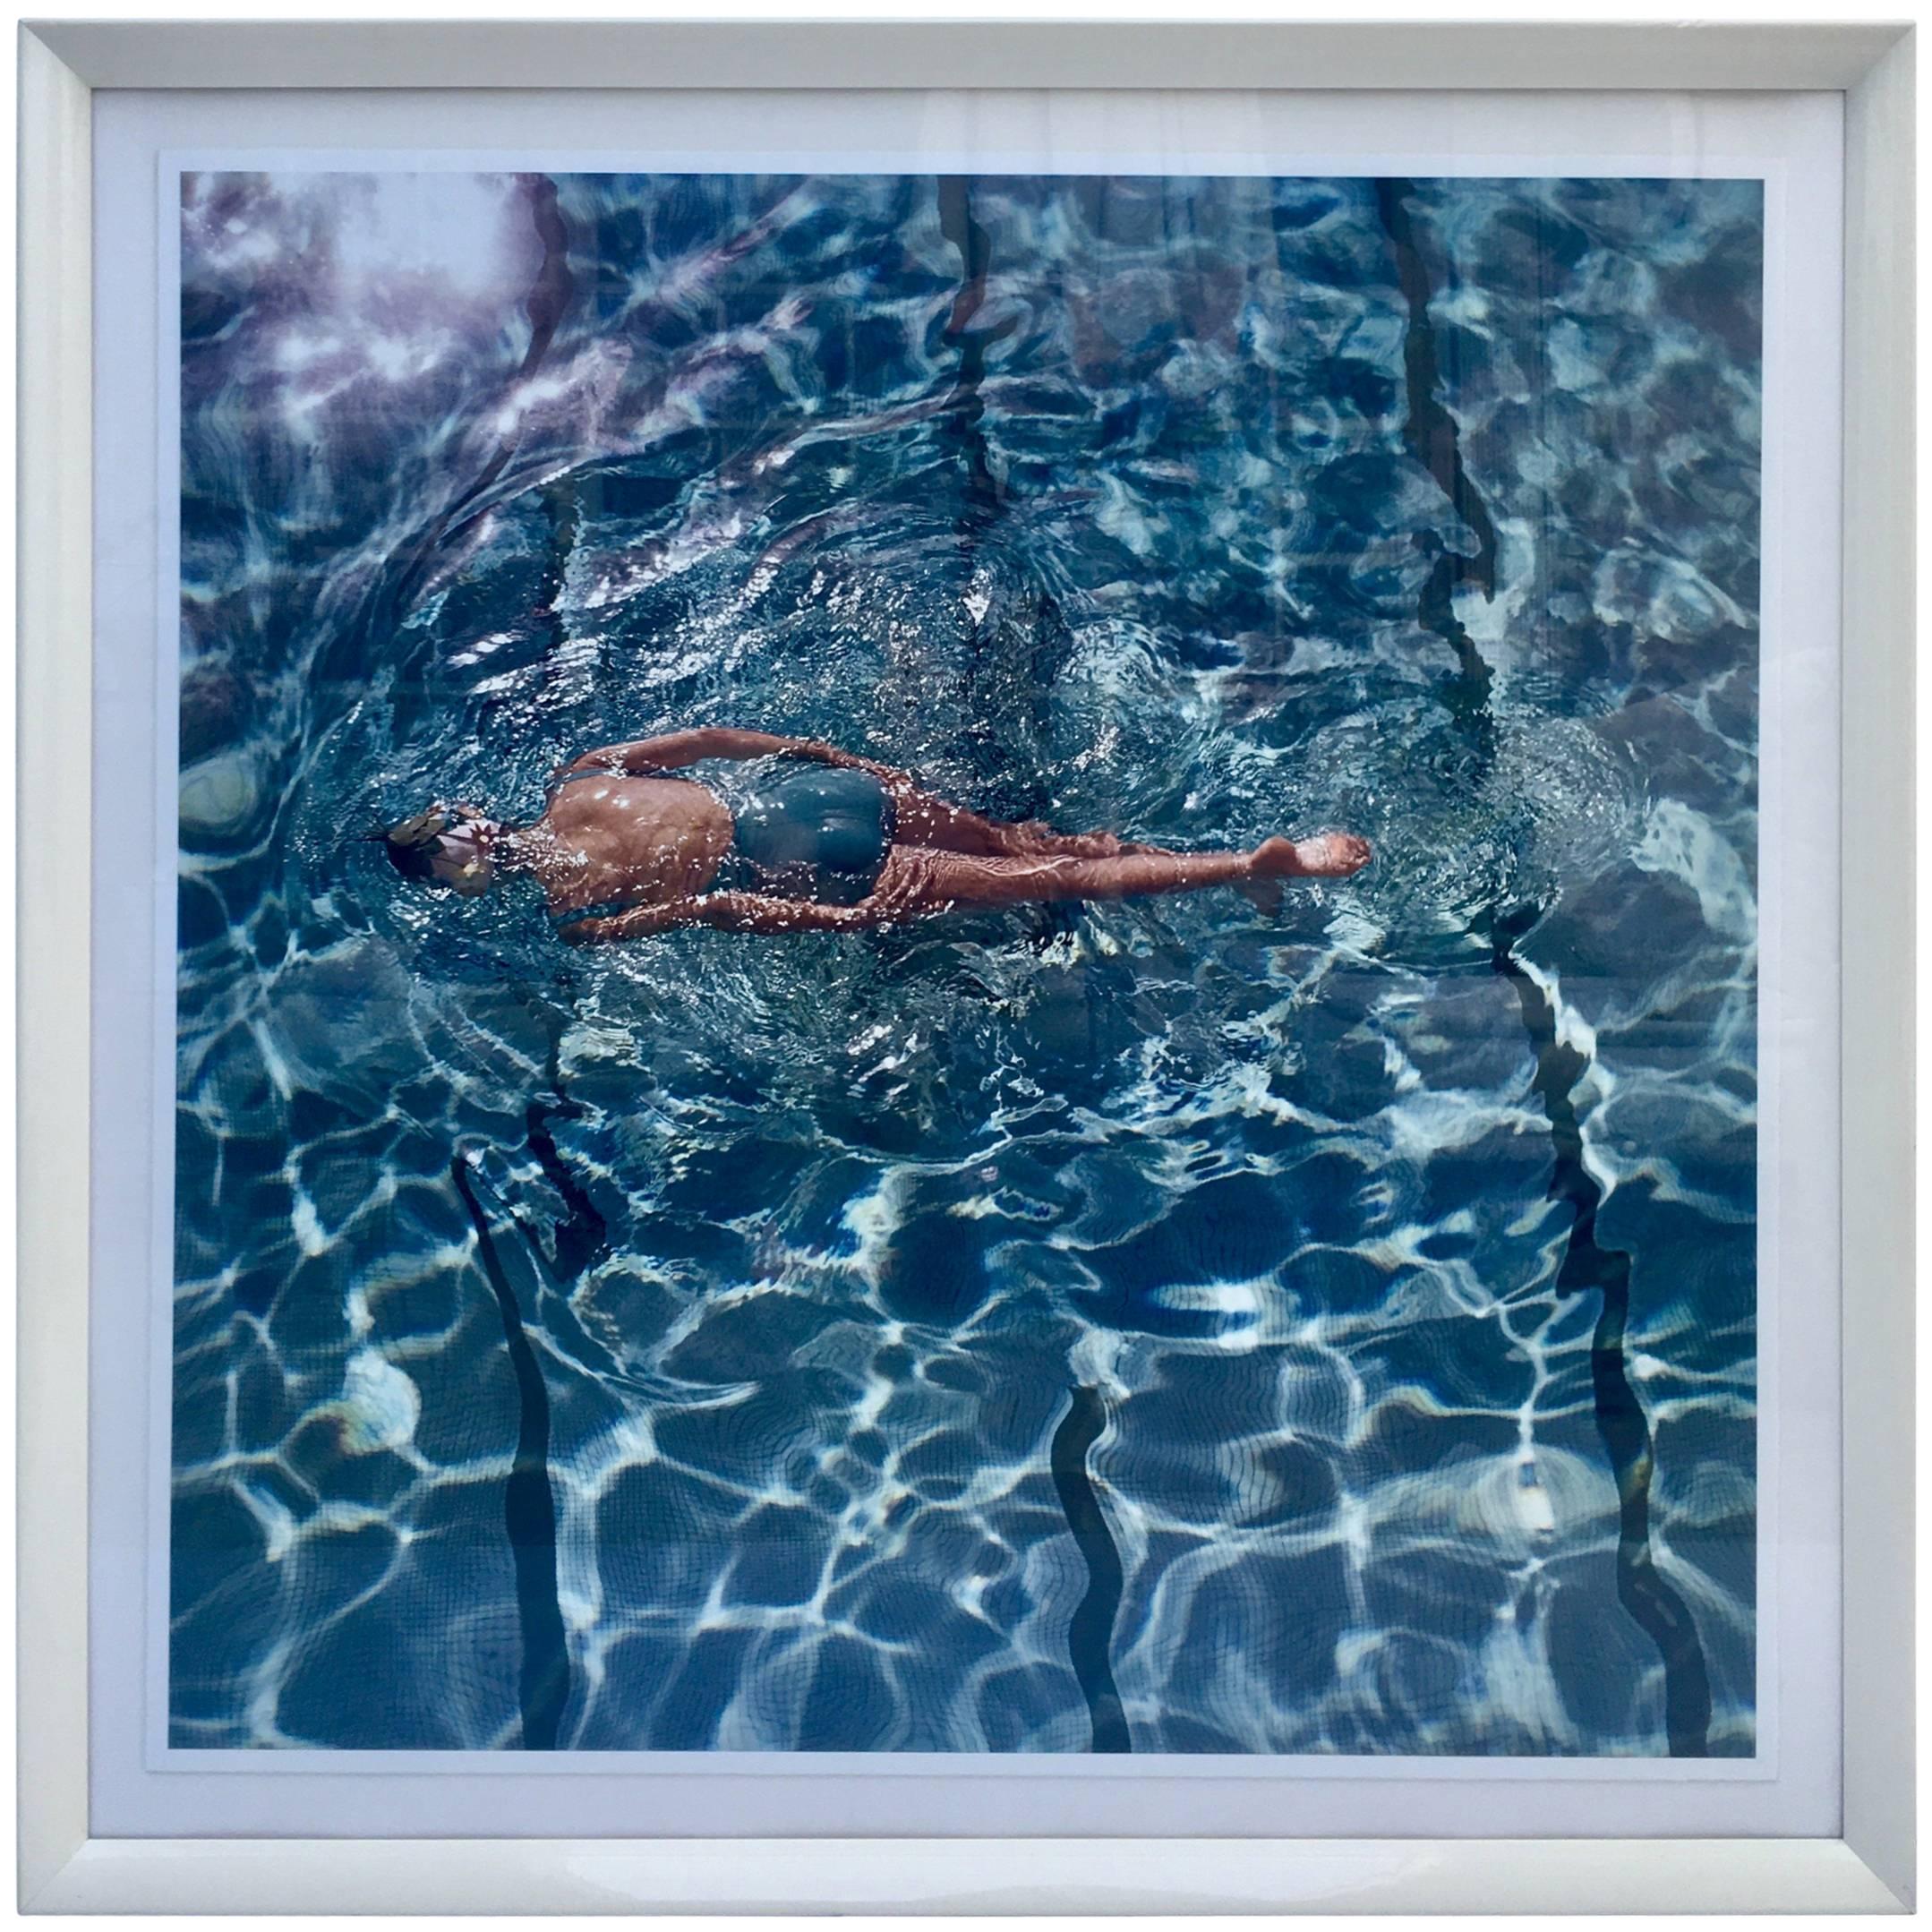 Contemporary Framed Photograph "the Swimmer" by Fred Lyons, 1960